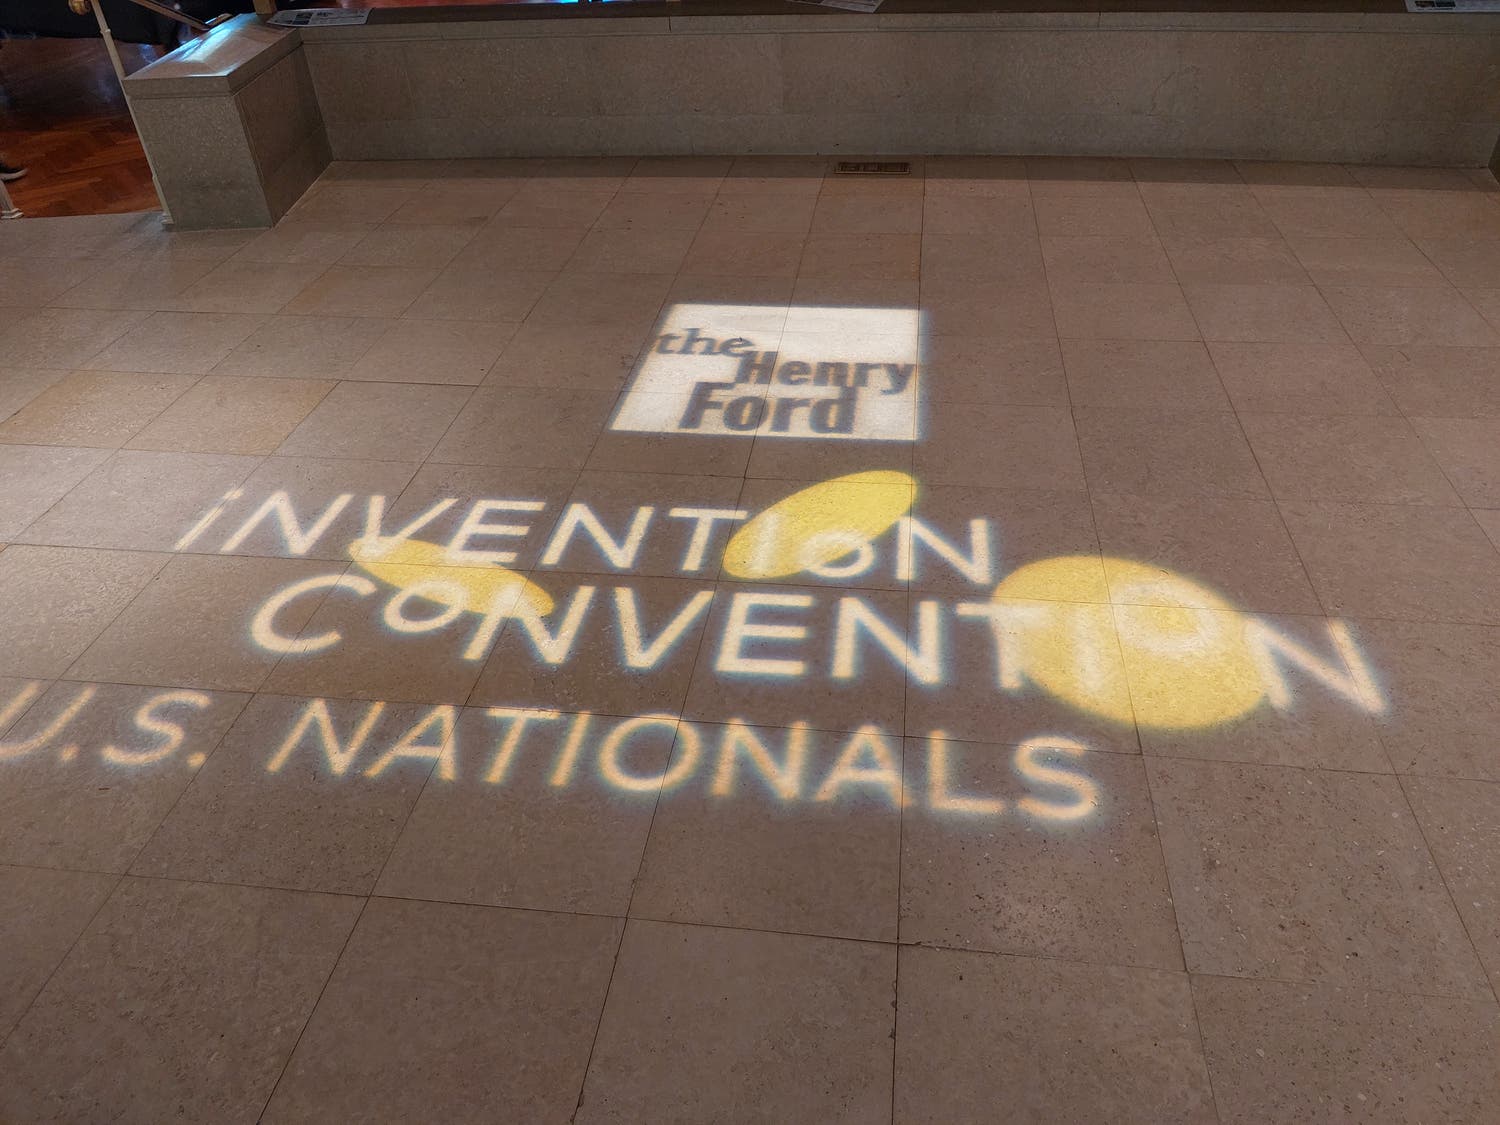 The Henry Ford and Invention Convention Worldwide logos